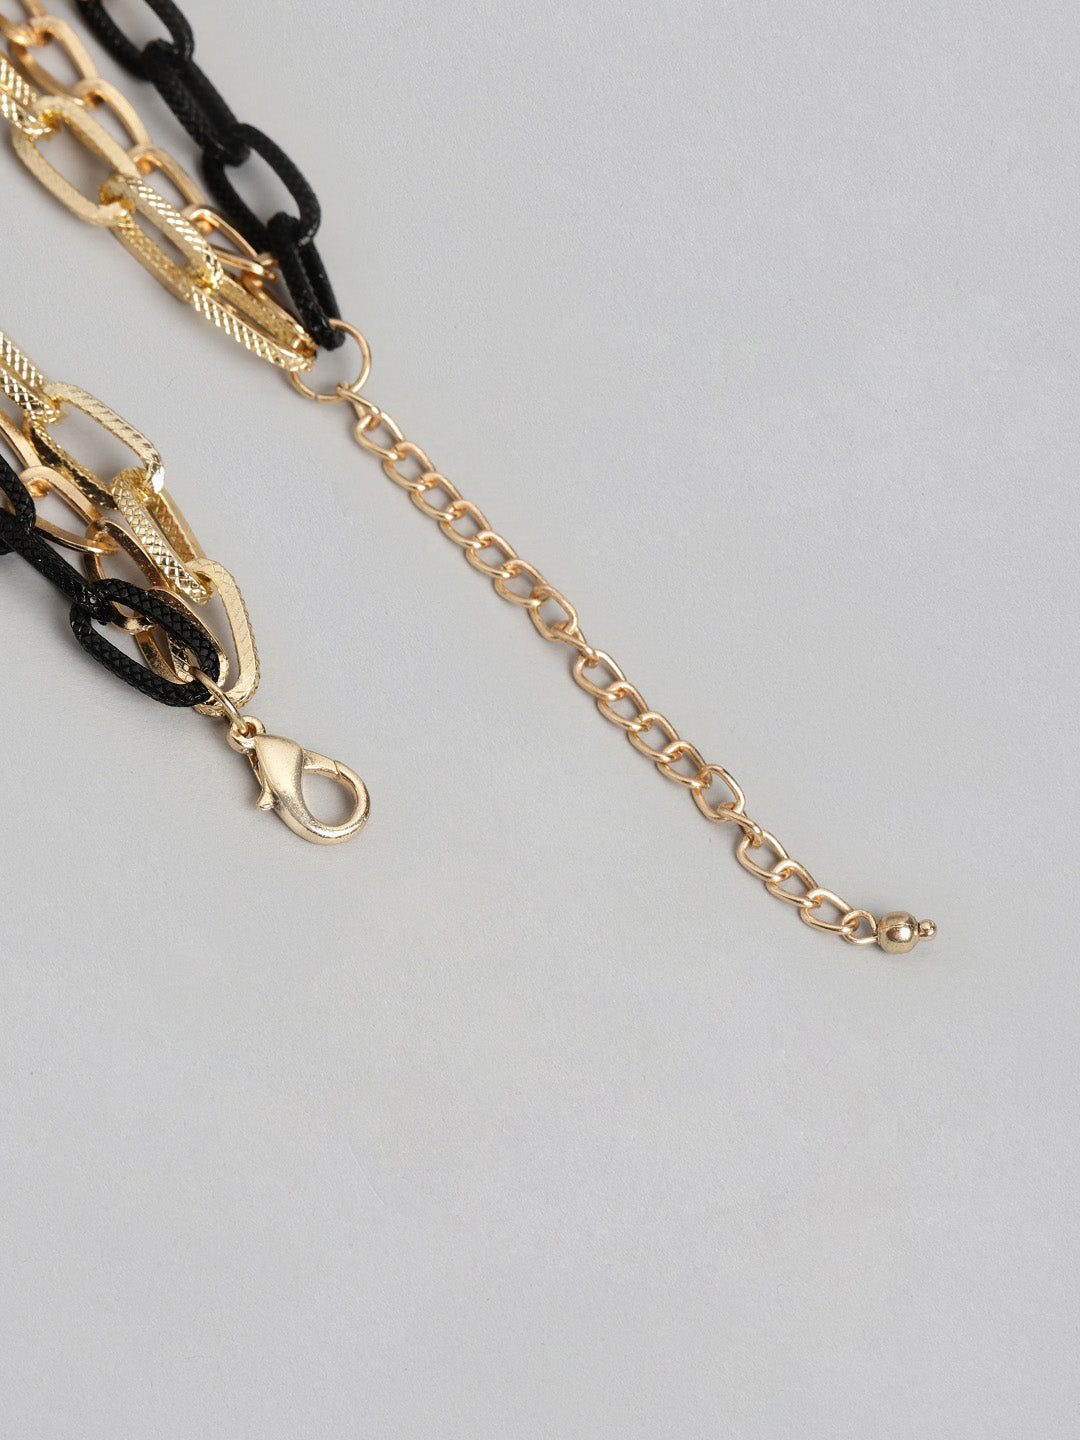 Blueberry black and golden inter lock chain layered necklace